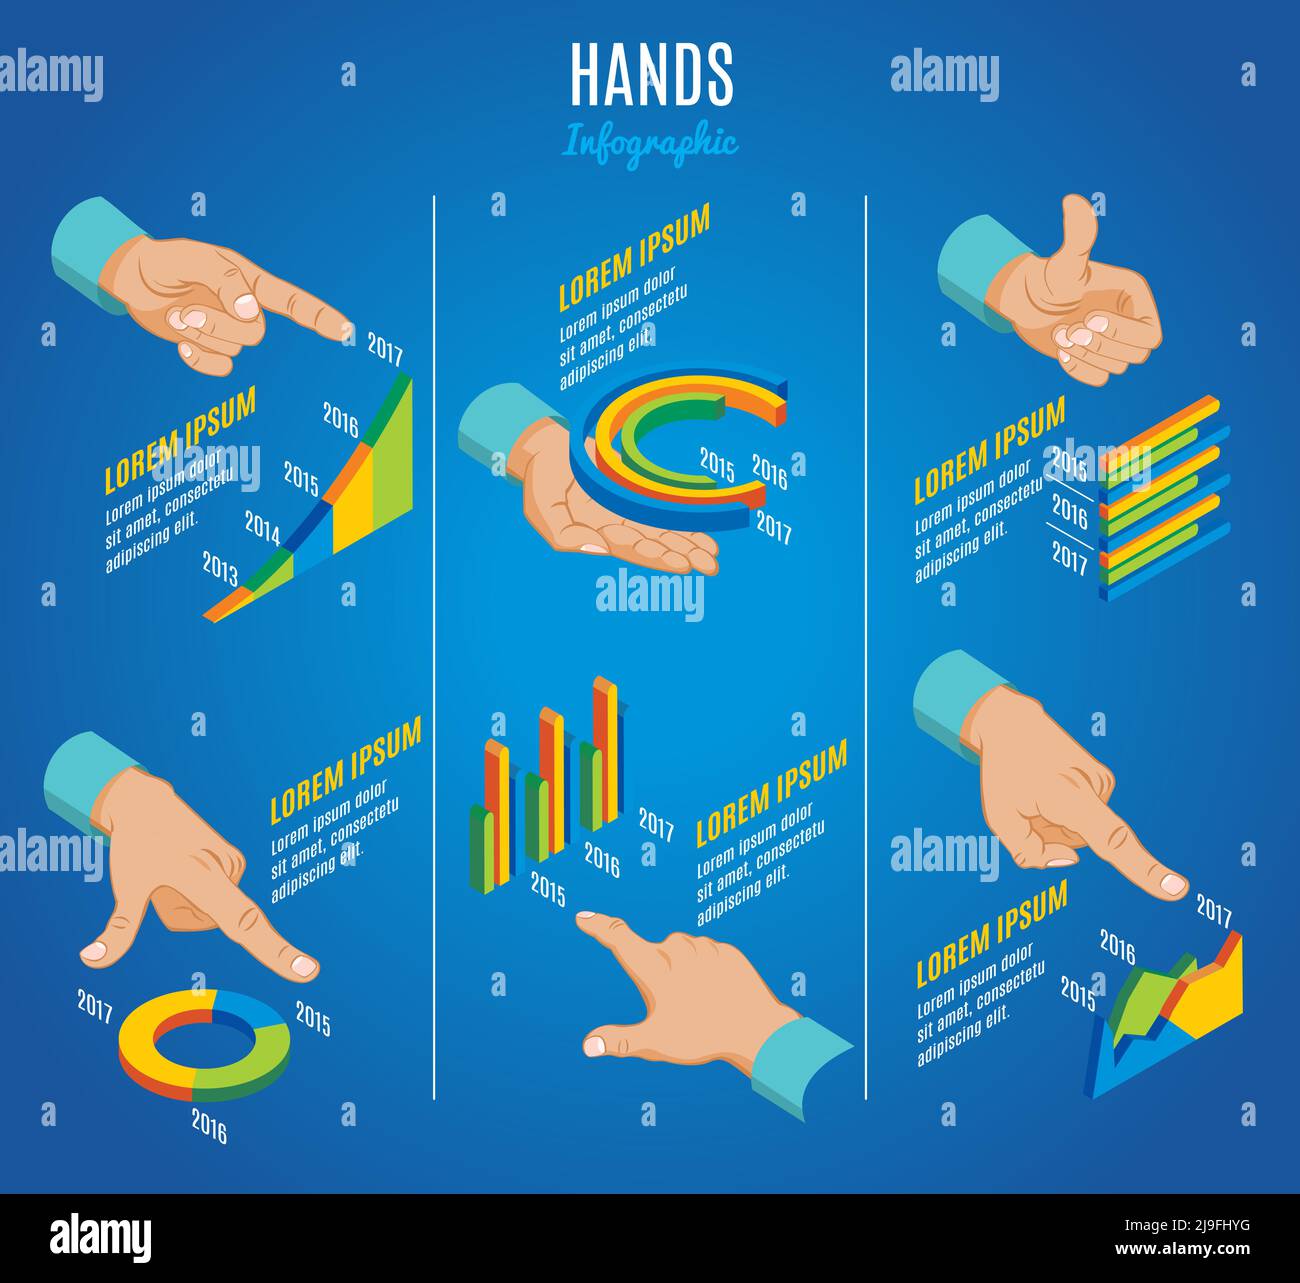 Isometric hands infographic concept with indicate hold okay showing touch gestures and business diagrams graphs charts isolated vector illustration Stock Vector